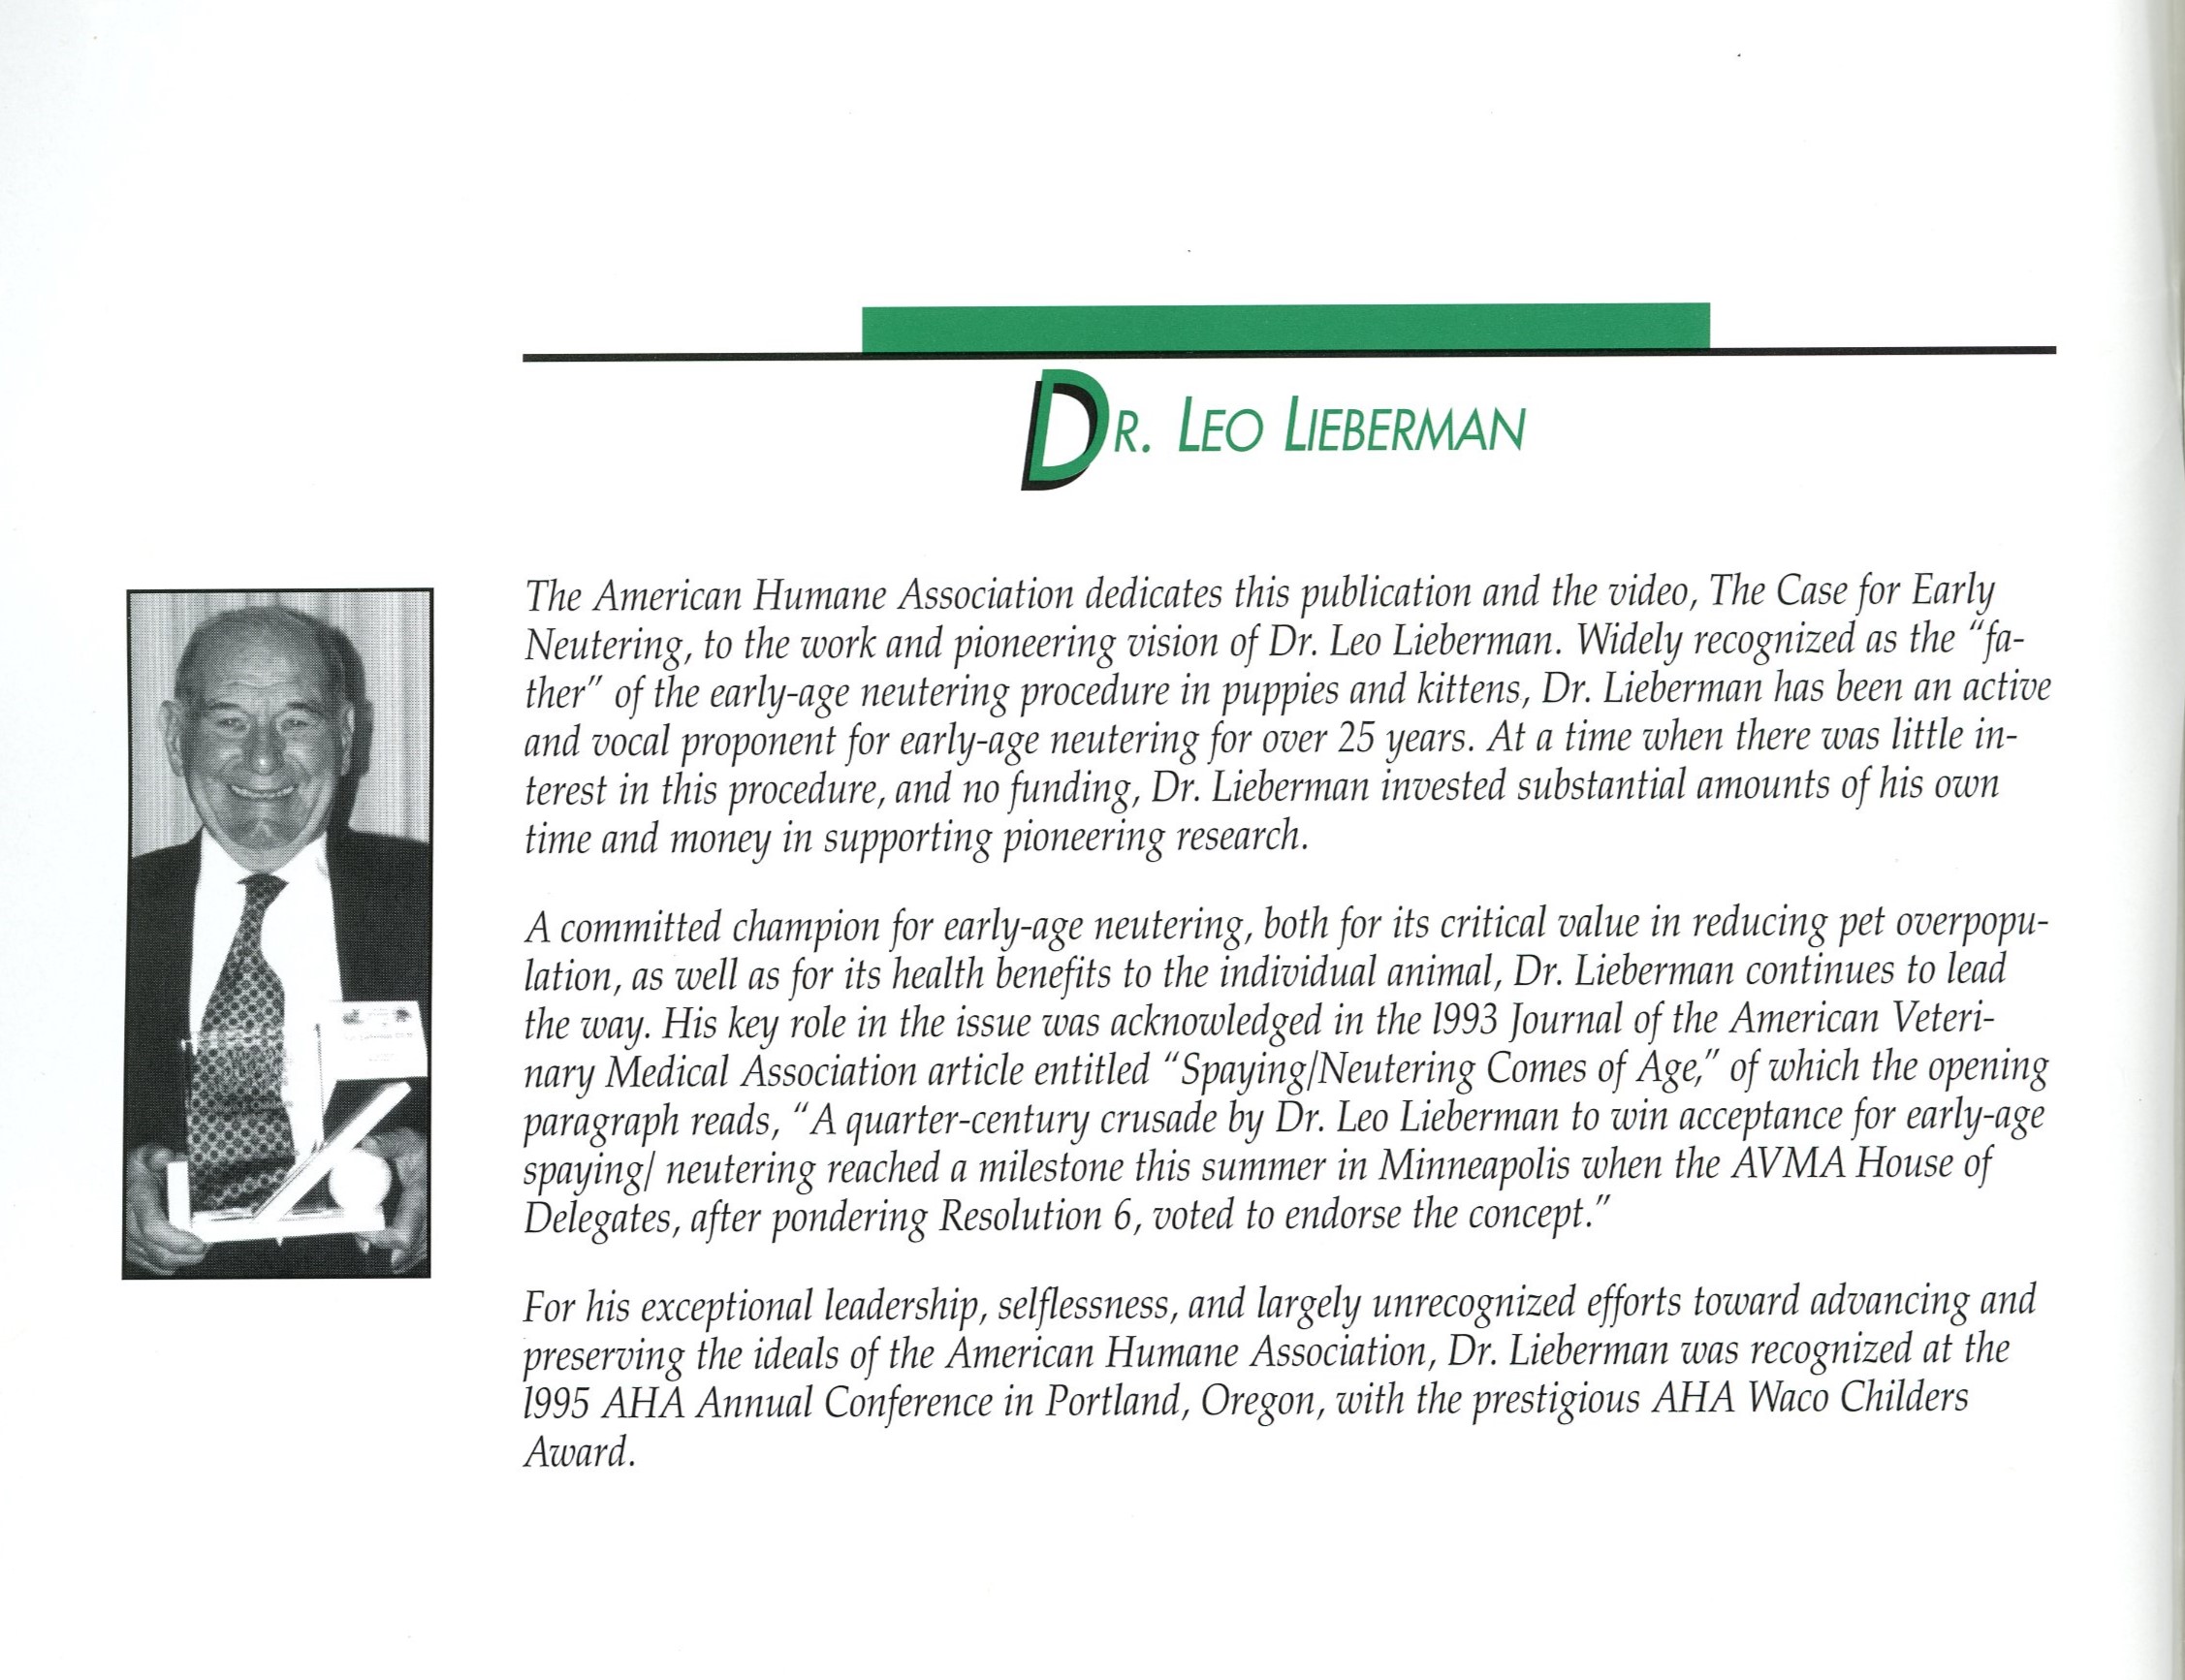 The American Humane Association dedicated their publication, The Case for Early Neutering, to Lieberman.